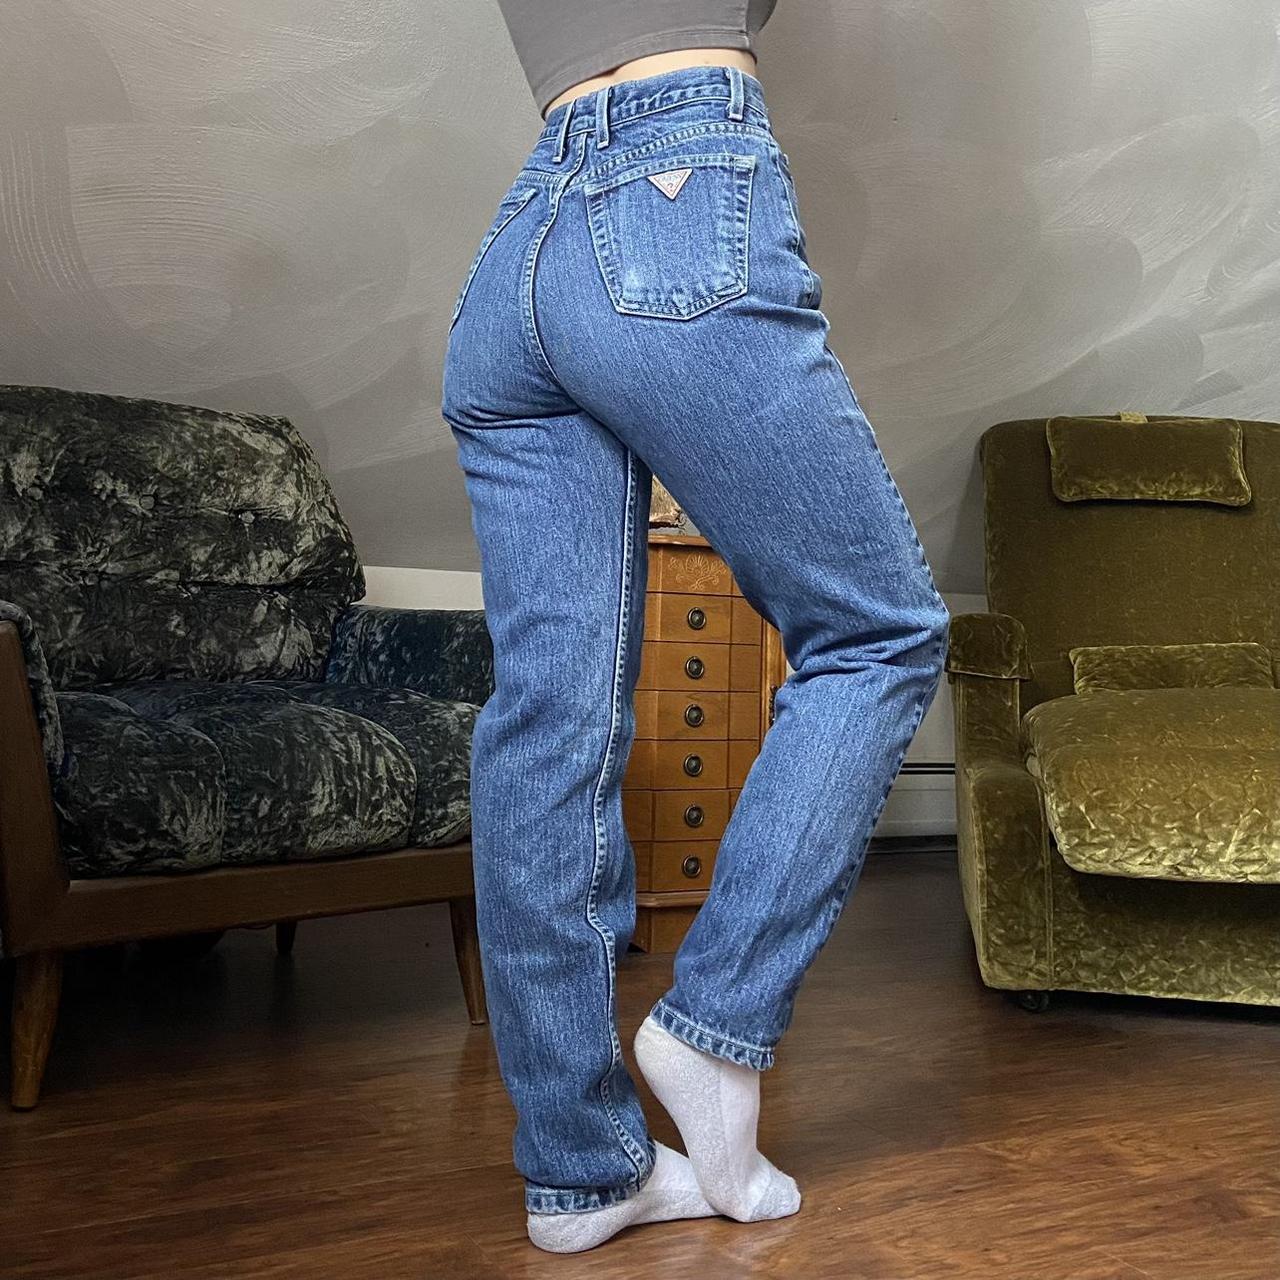 Guess women's jeans